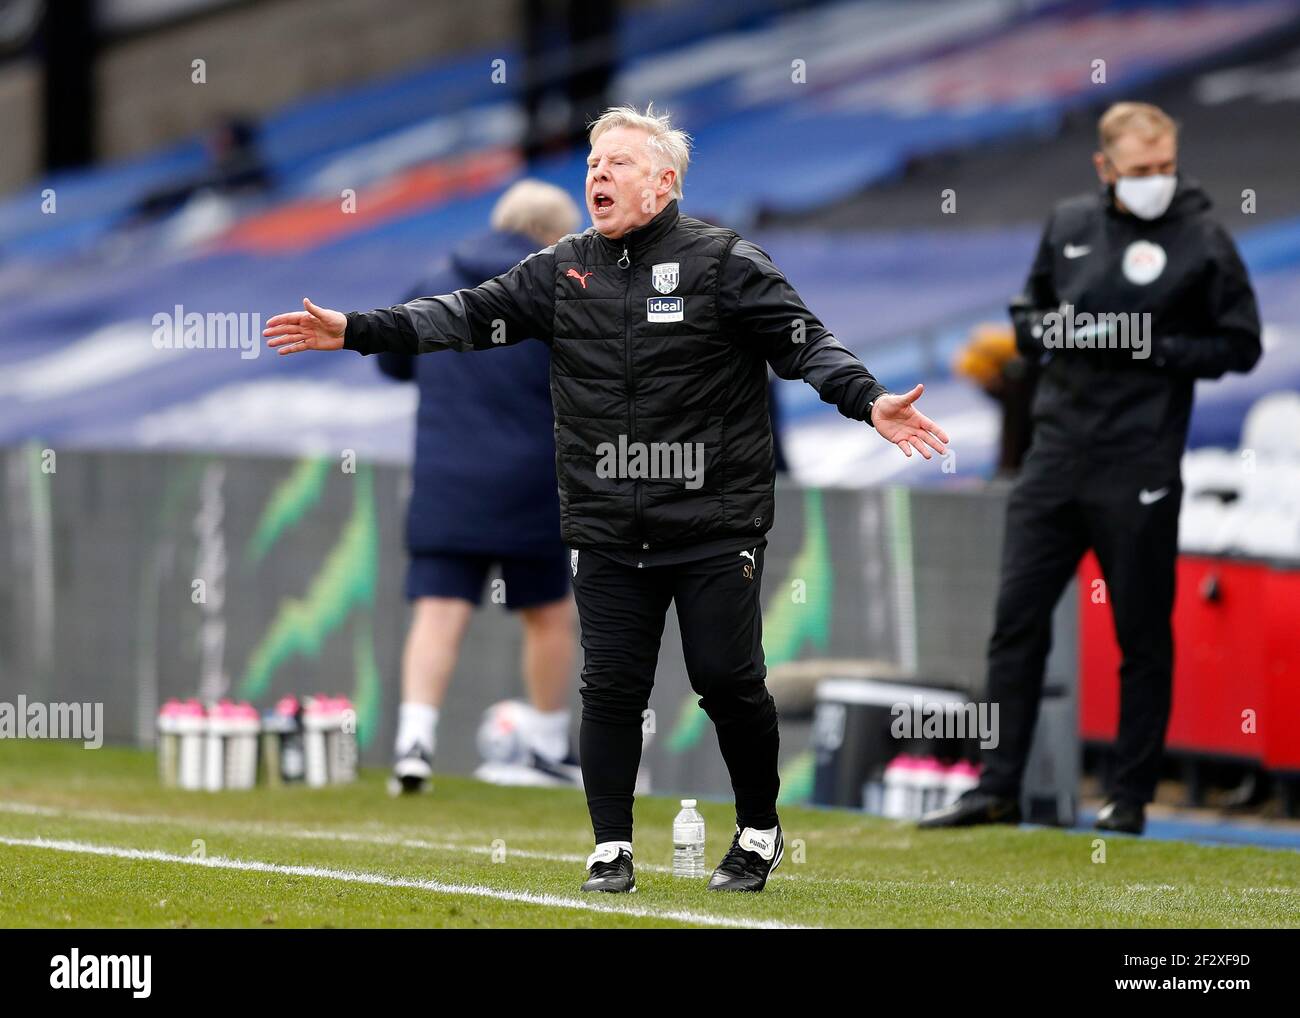 Selhurst Park, London, UK. 13th Mar, 2021. English Premier League Football, Crystal Palace versus West Bromwich Albion; West Bromwich Albion Assistant Coach Sammy Lee shouting instructions to the West Bromwich Albion players from the touchline Credit: Action Plus Sports/Alamy Live News Stock Photo